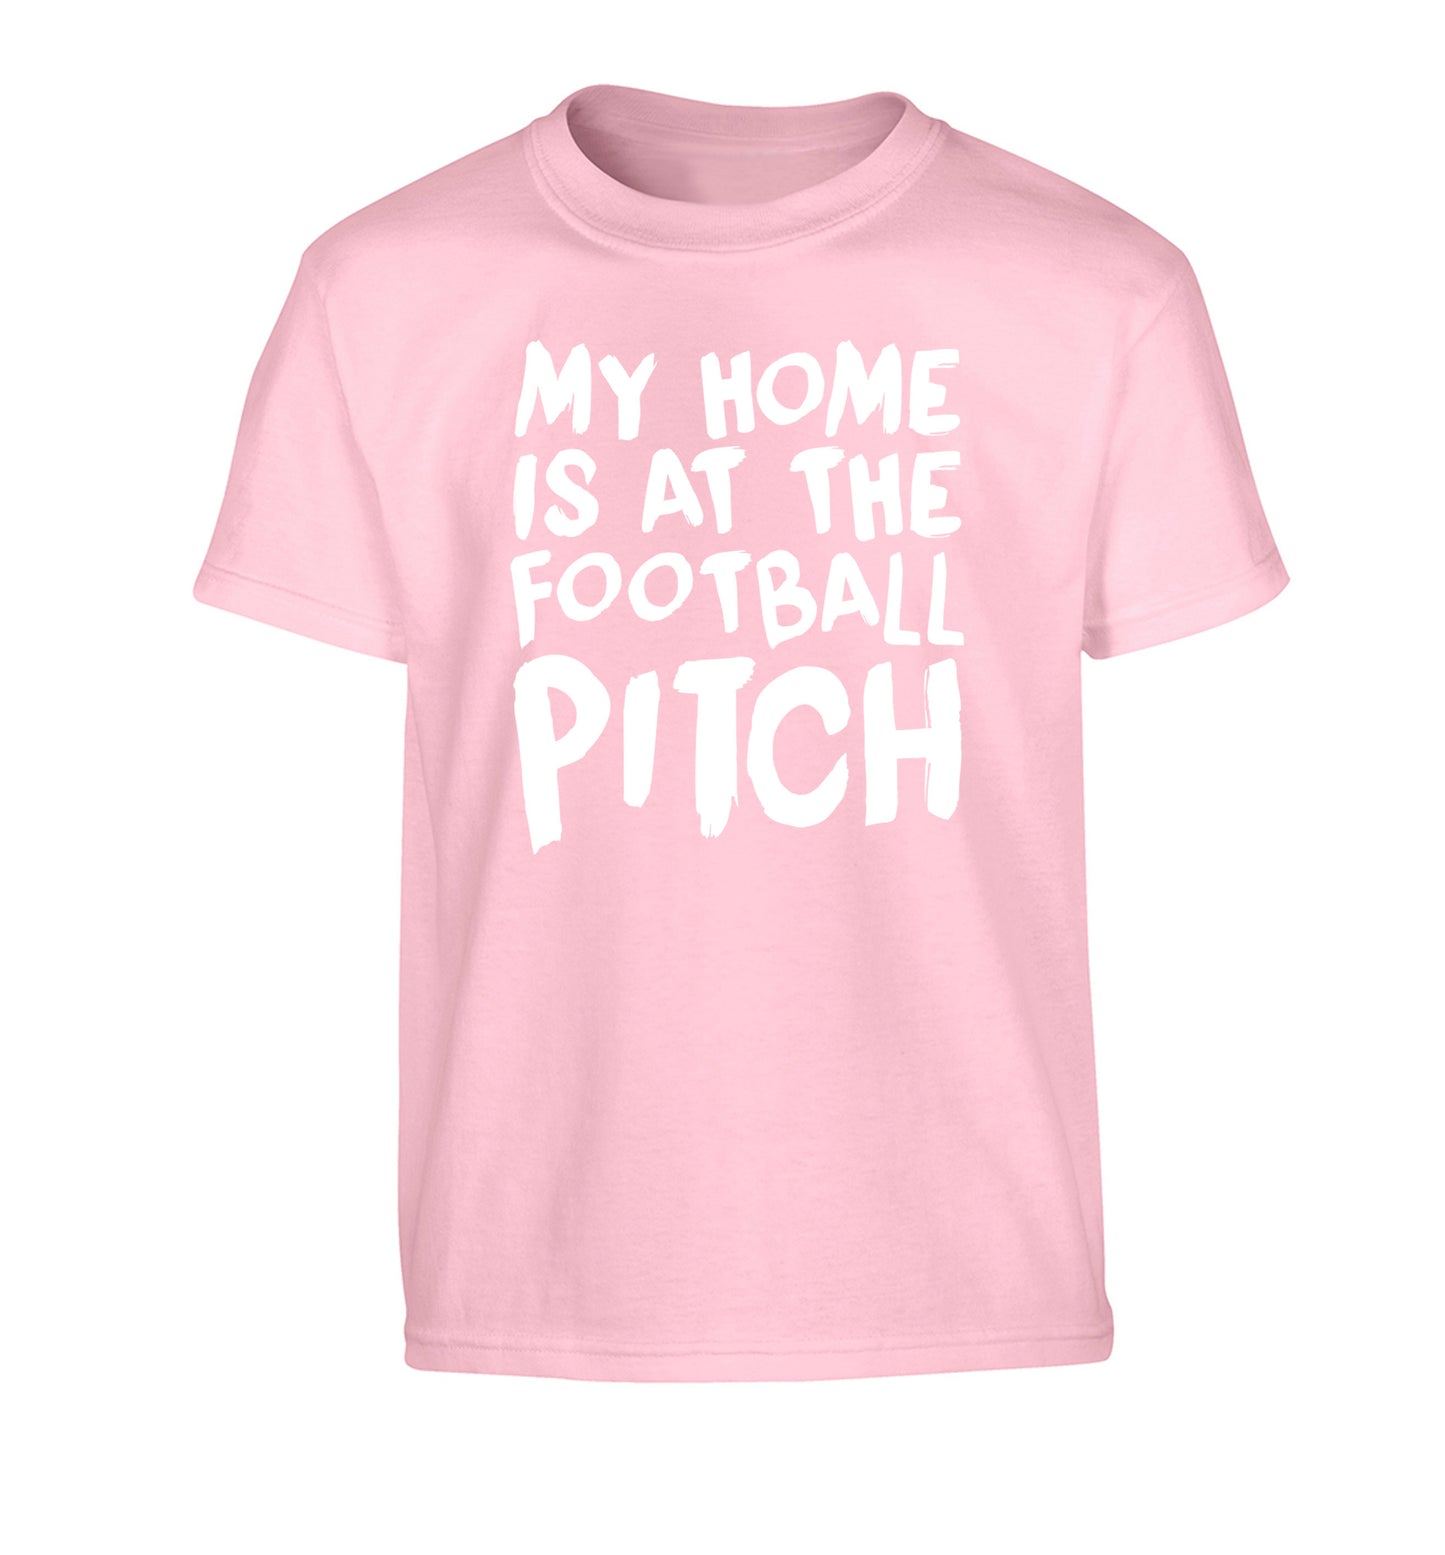 My home is at the football pitch Children's light pink Tshirt 12-14 Years